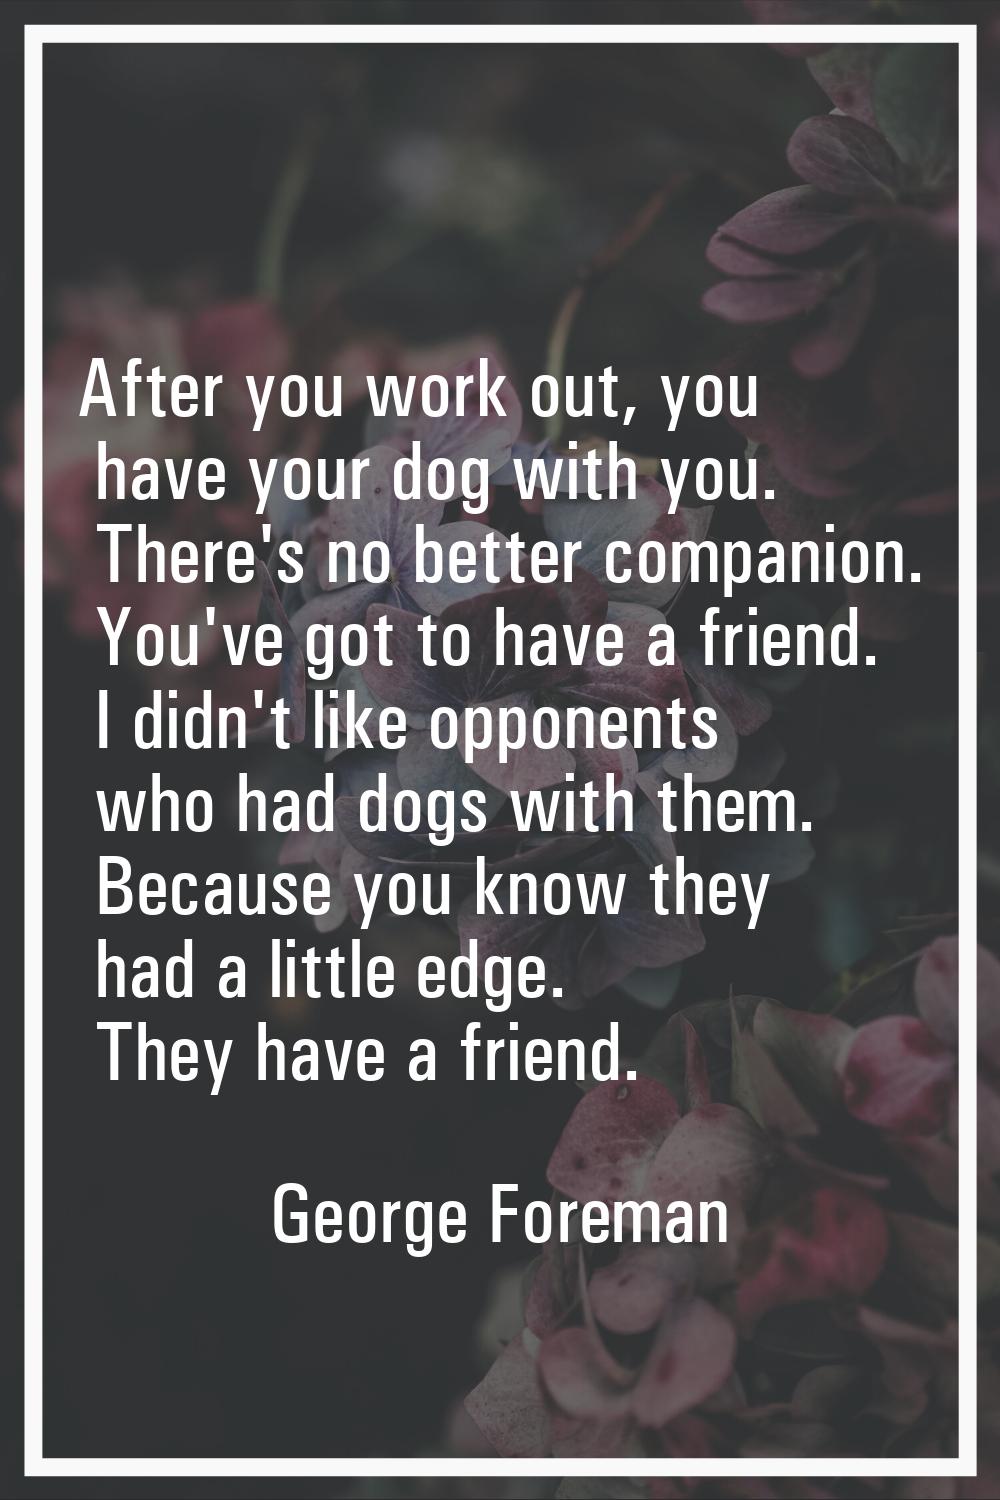 After you work out, you have your dog with you. There's no better companion. You've got to have a f